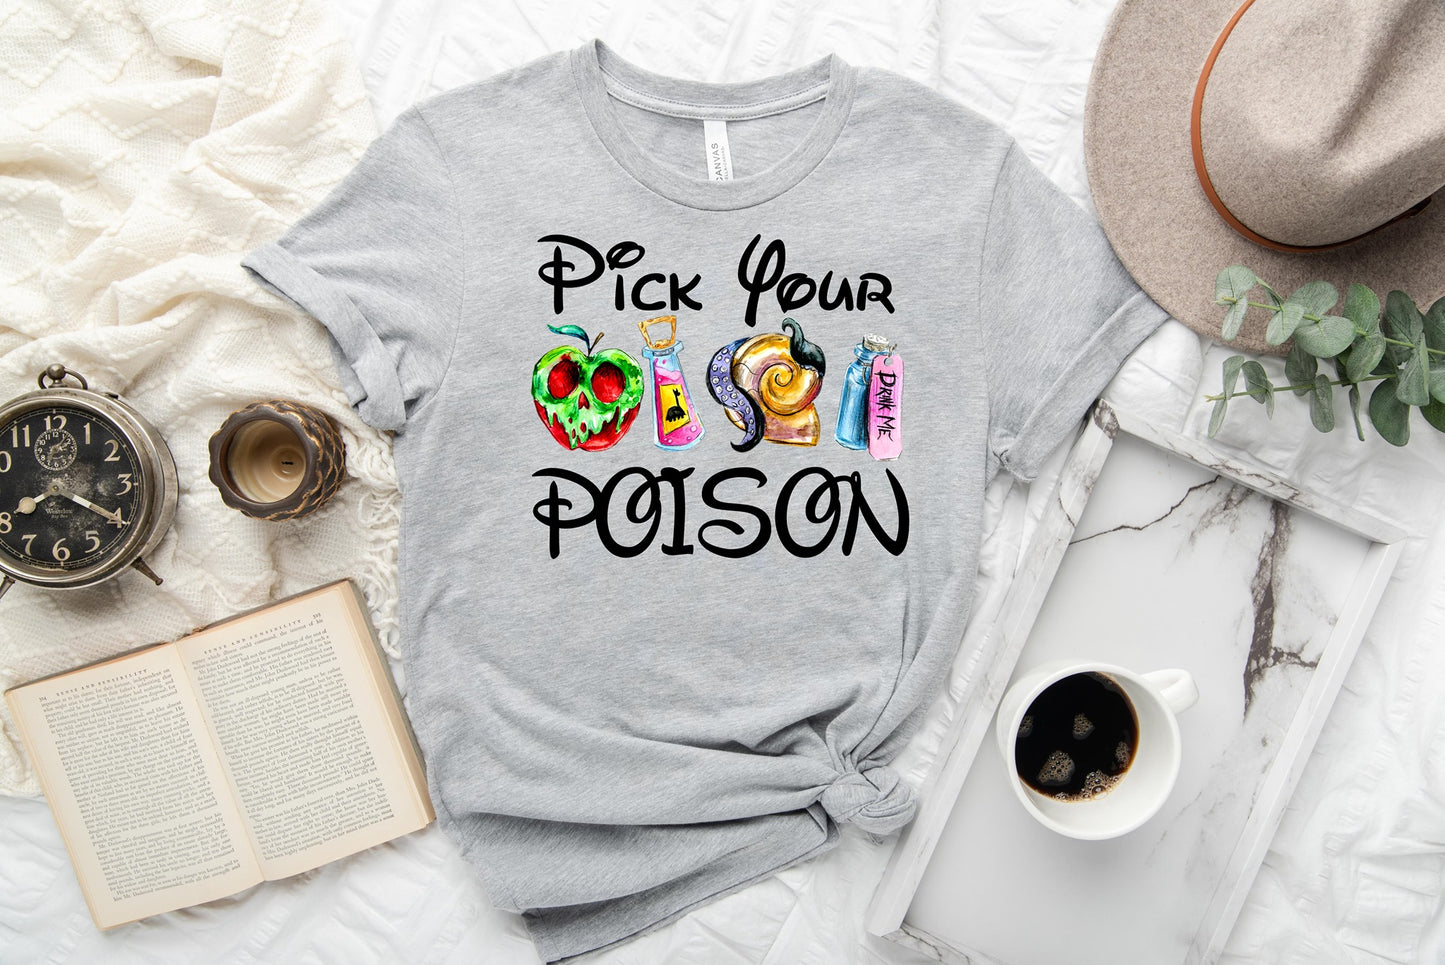 OUTFIT RUN 3-PICK YOUR POISON TEE